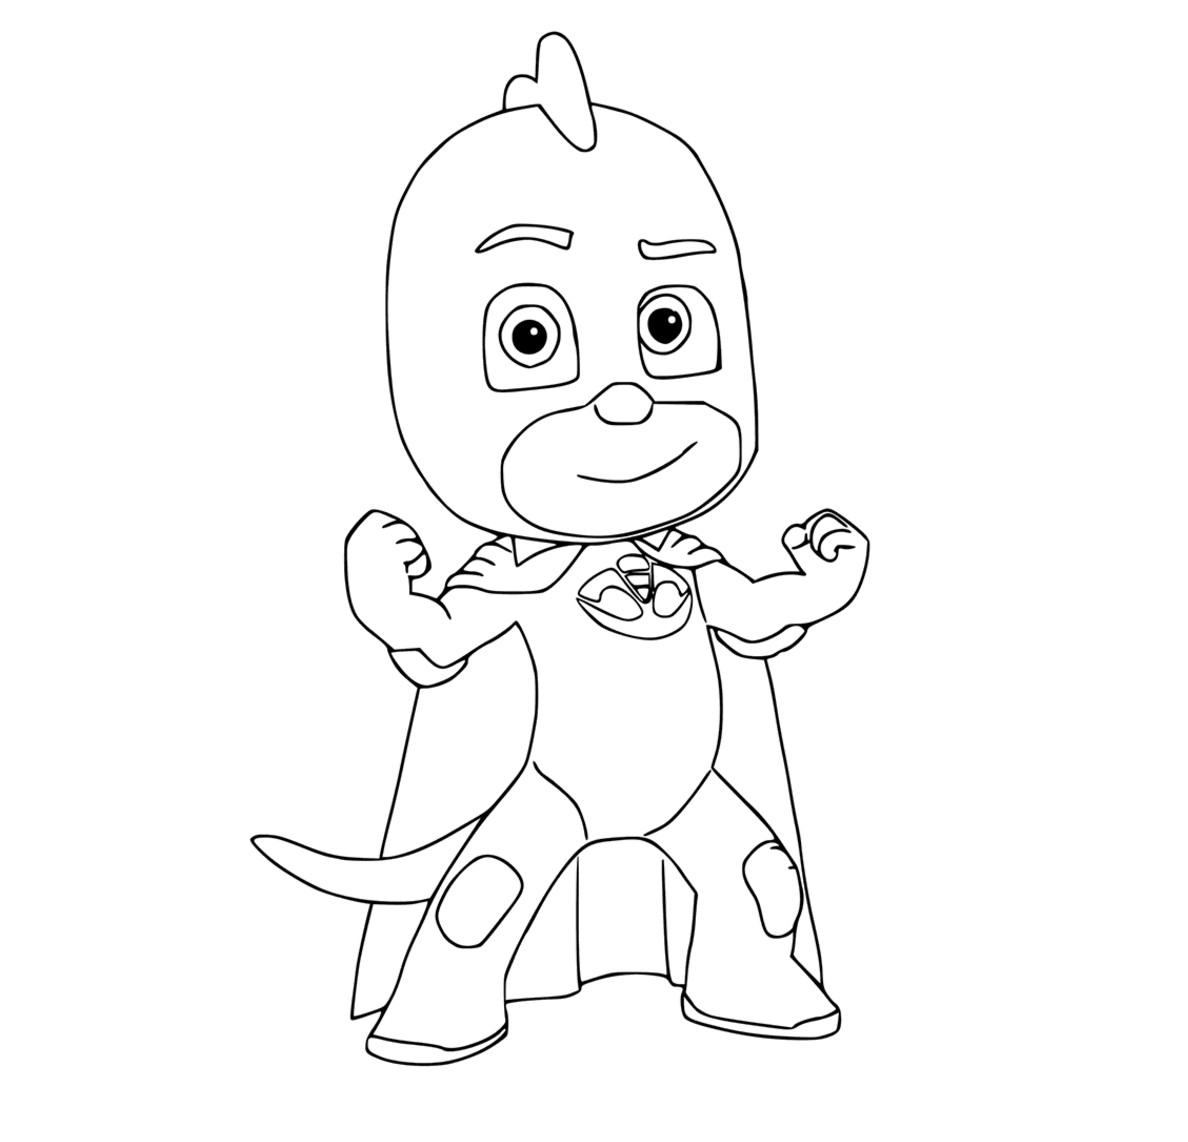 Free Coloring Sheets For Boys Pj Mask
 PJ Masks coloring pages to and print for free